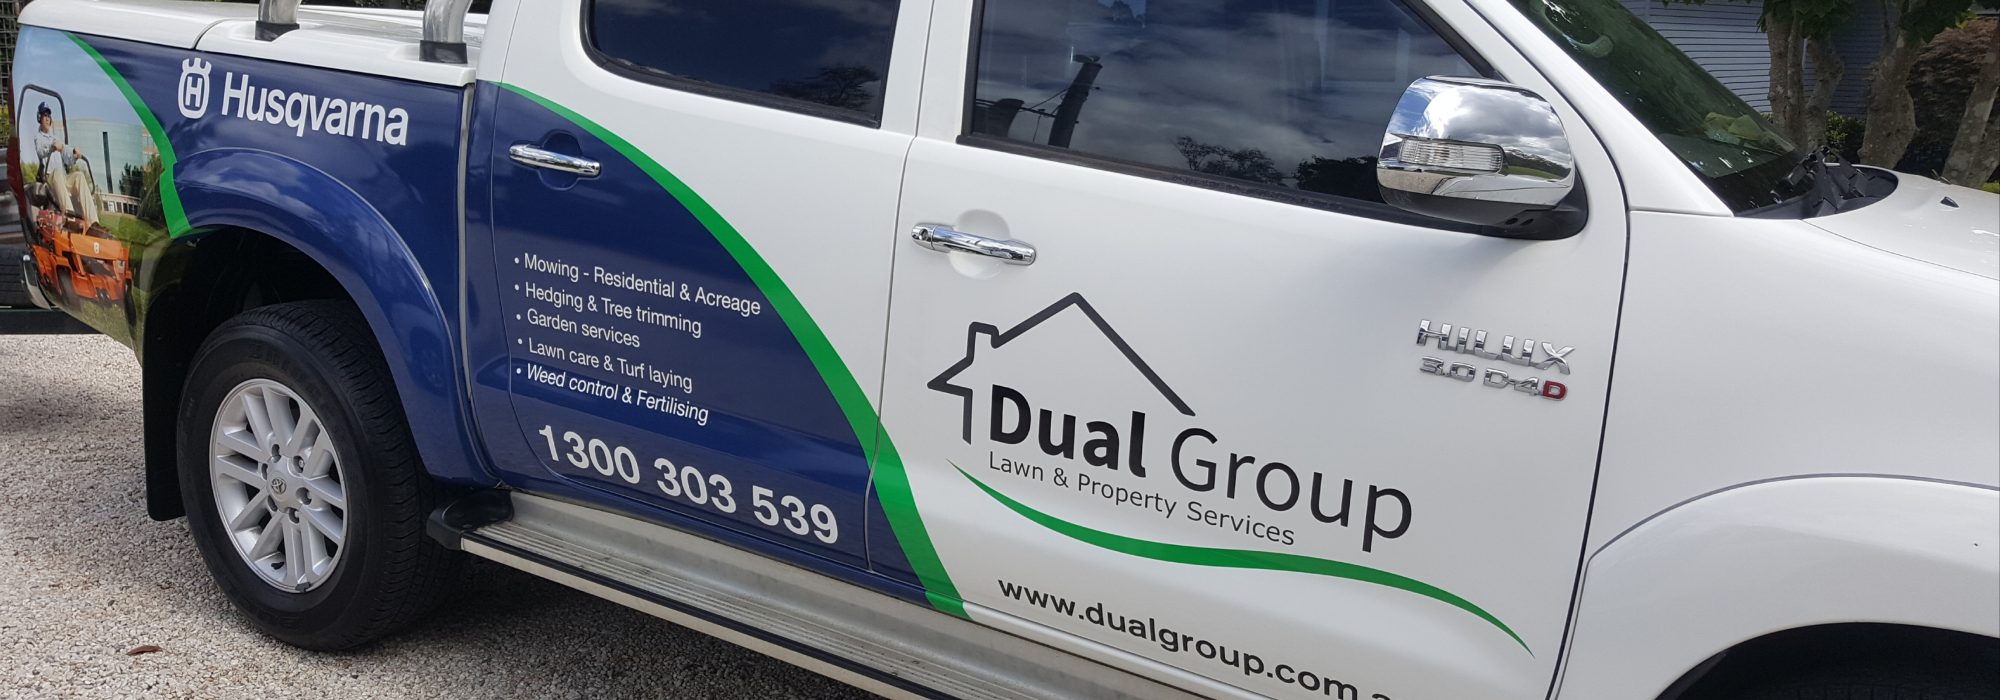 Dual Group Truck